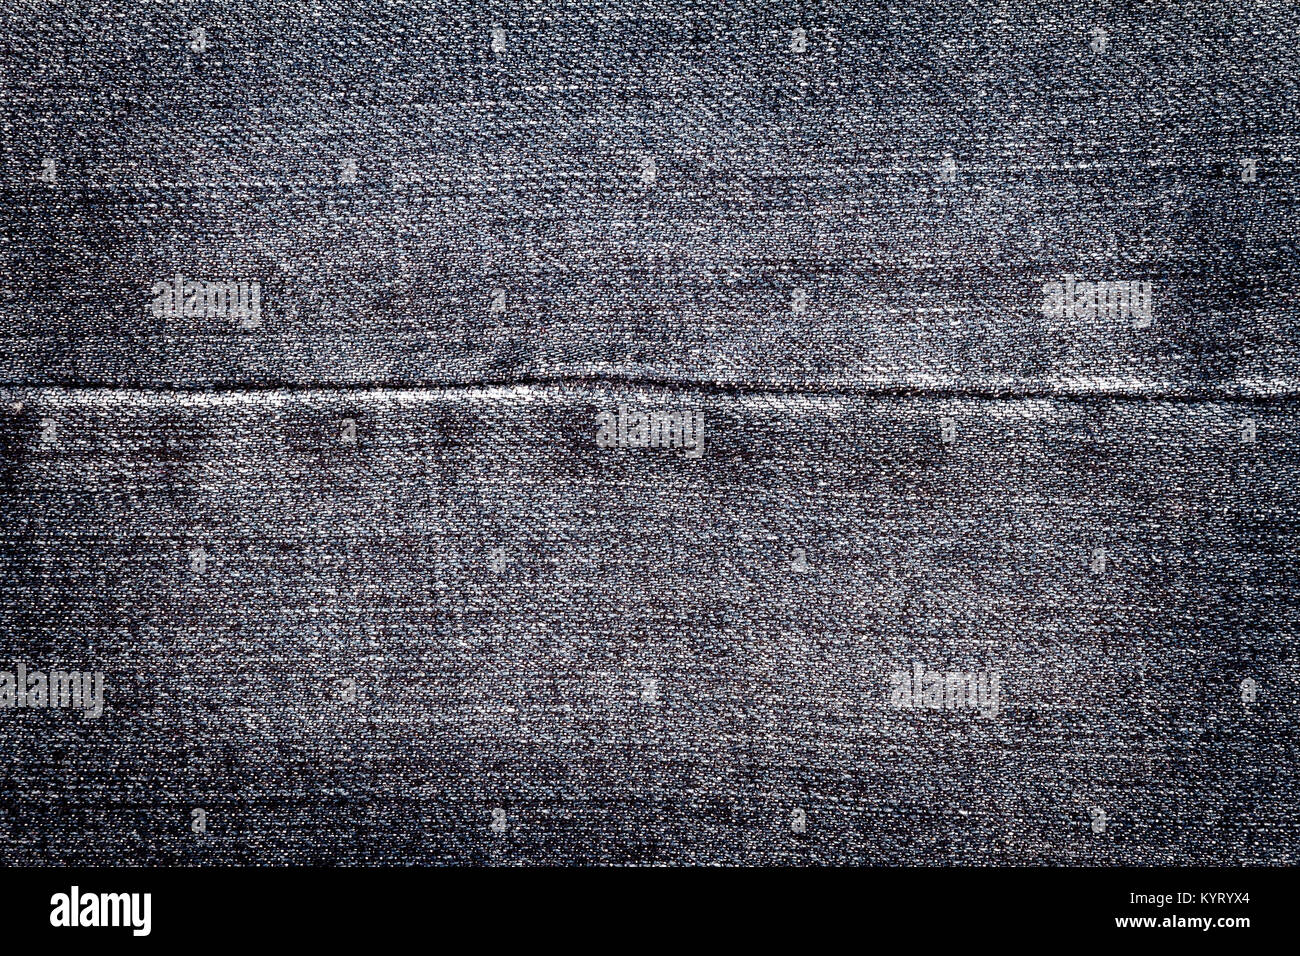 Black jeans texture. Denim jeans texture, denim jeans background with a ...